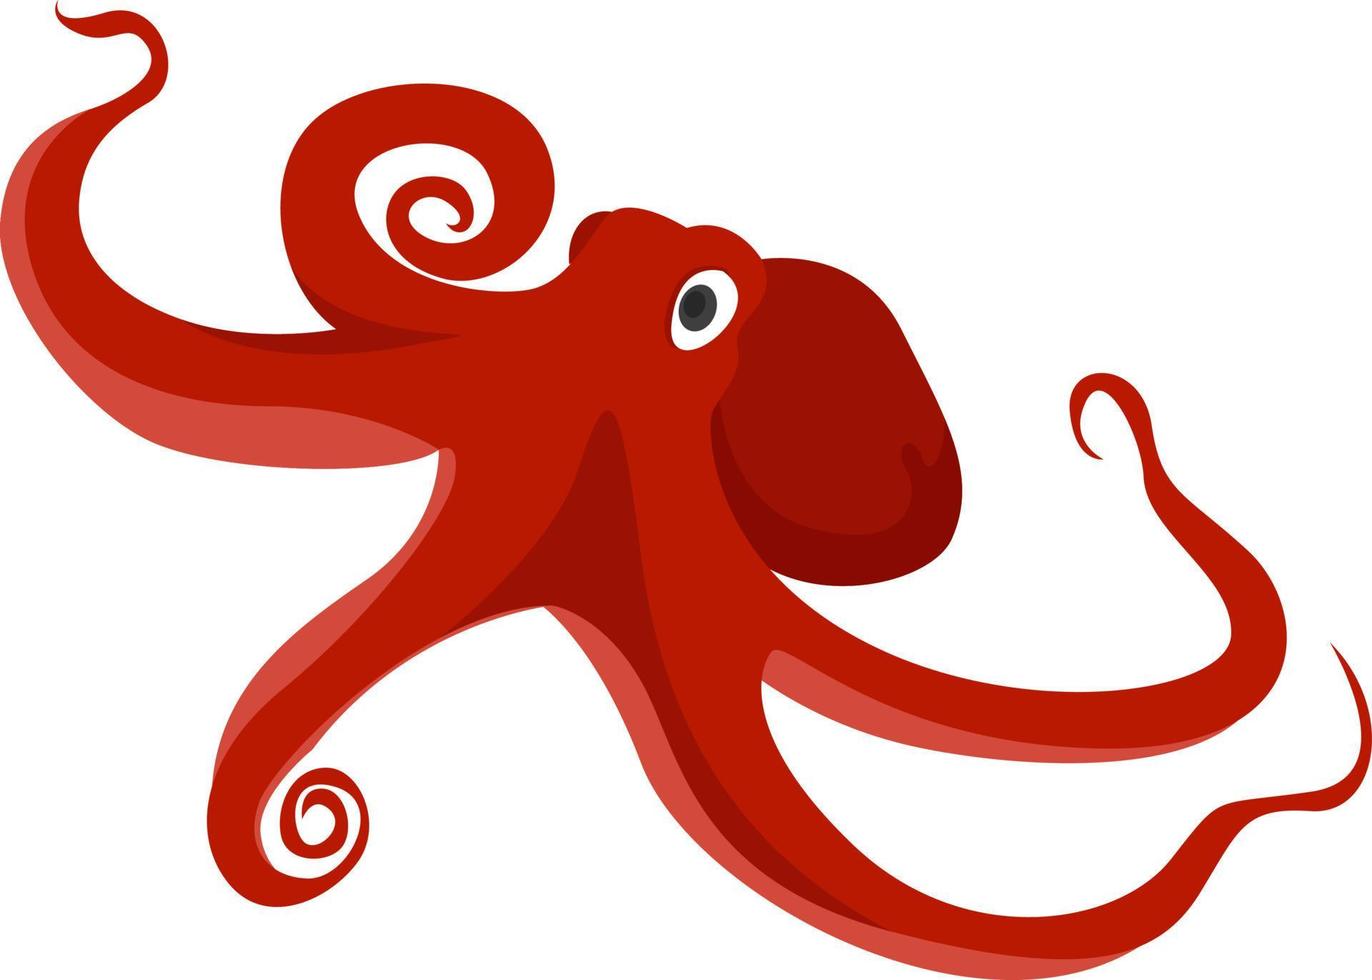 Red octopus, illustration, vector on white background